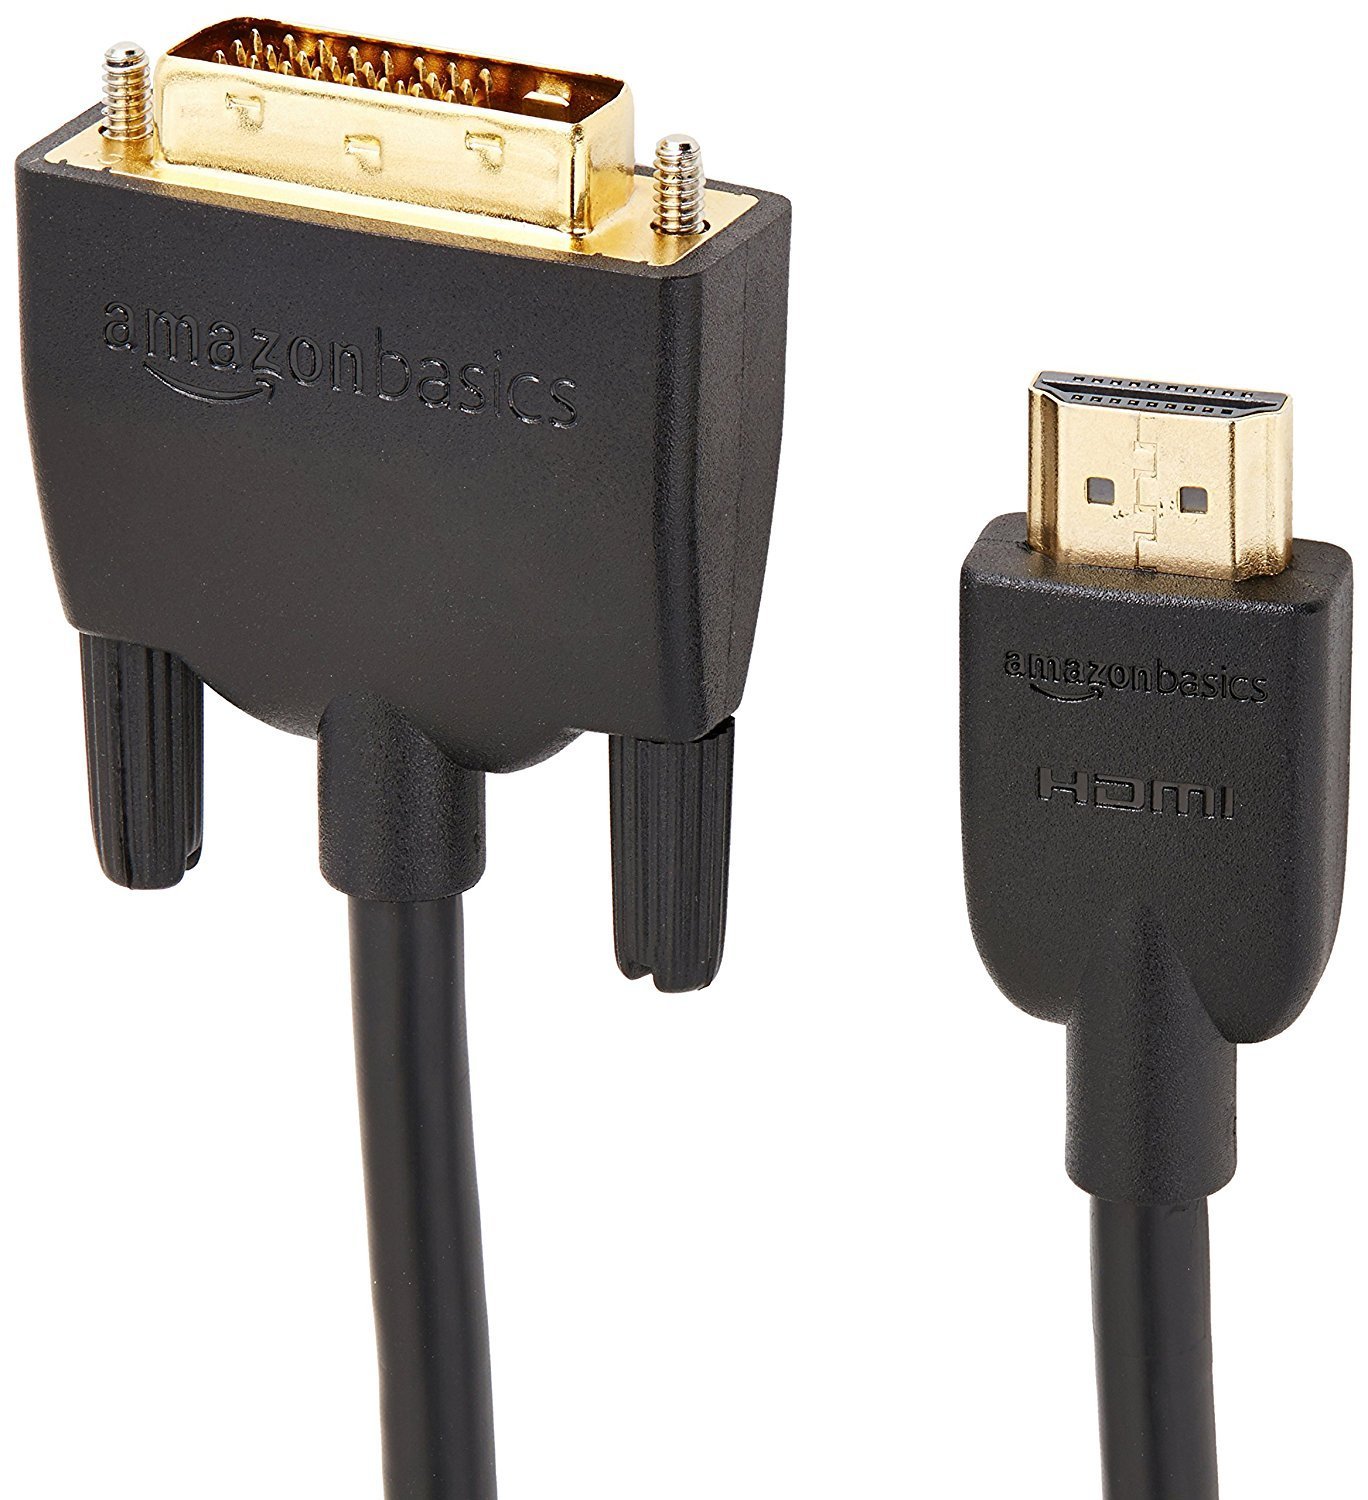 Amazon Basics HDMI to DVI Adapter Cable, Bi-Directional 1080p, Gold Plated, Black, 10 Feet, 1-Pack